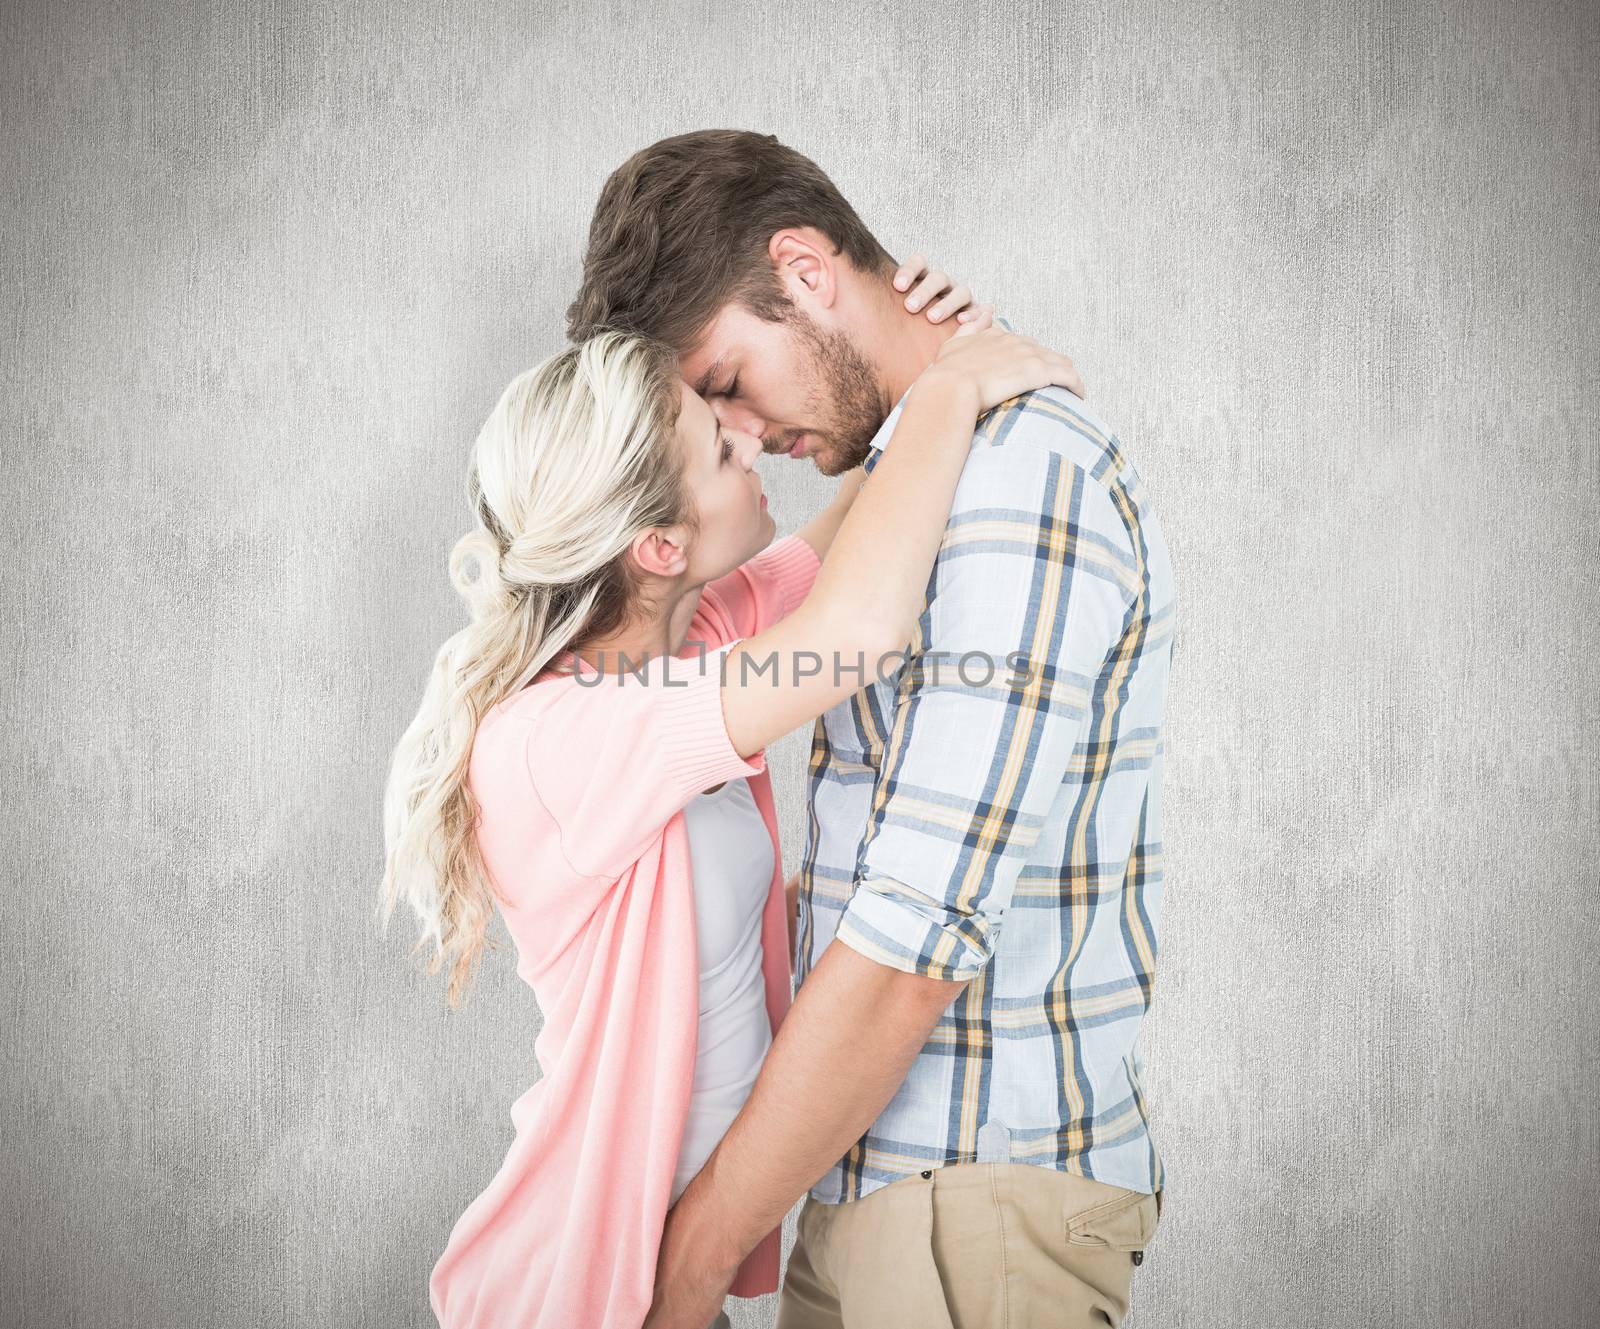 Attractive young couple about to kiss against white background